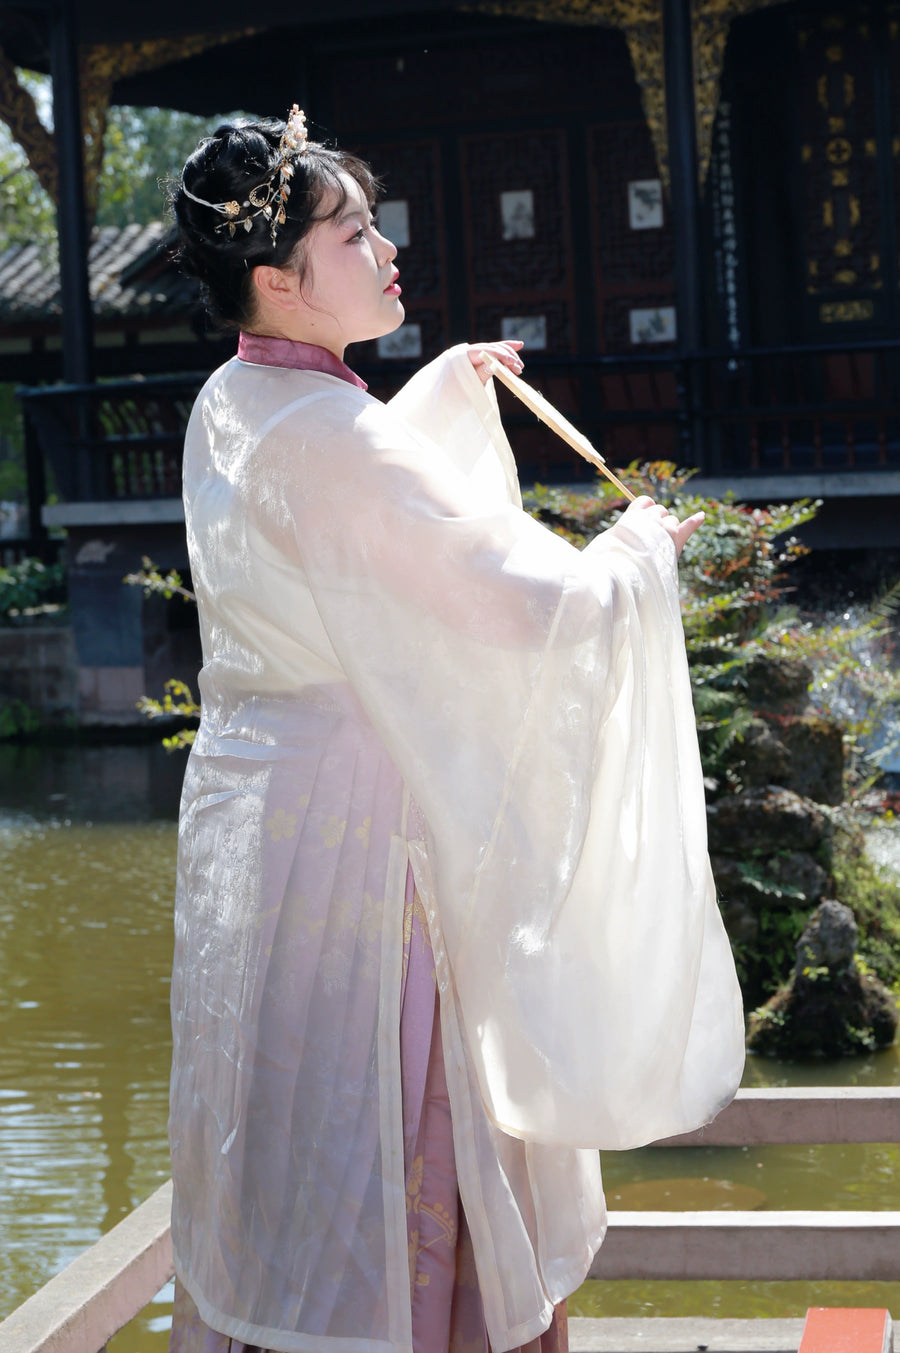 Ziluo 紫罗 Violet Late Ming Changshan Standing Collar Shirt